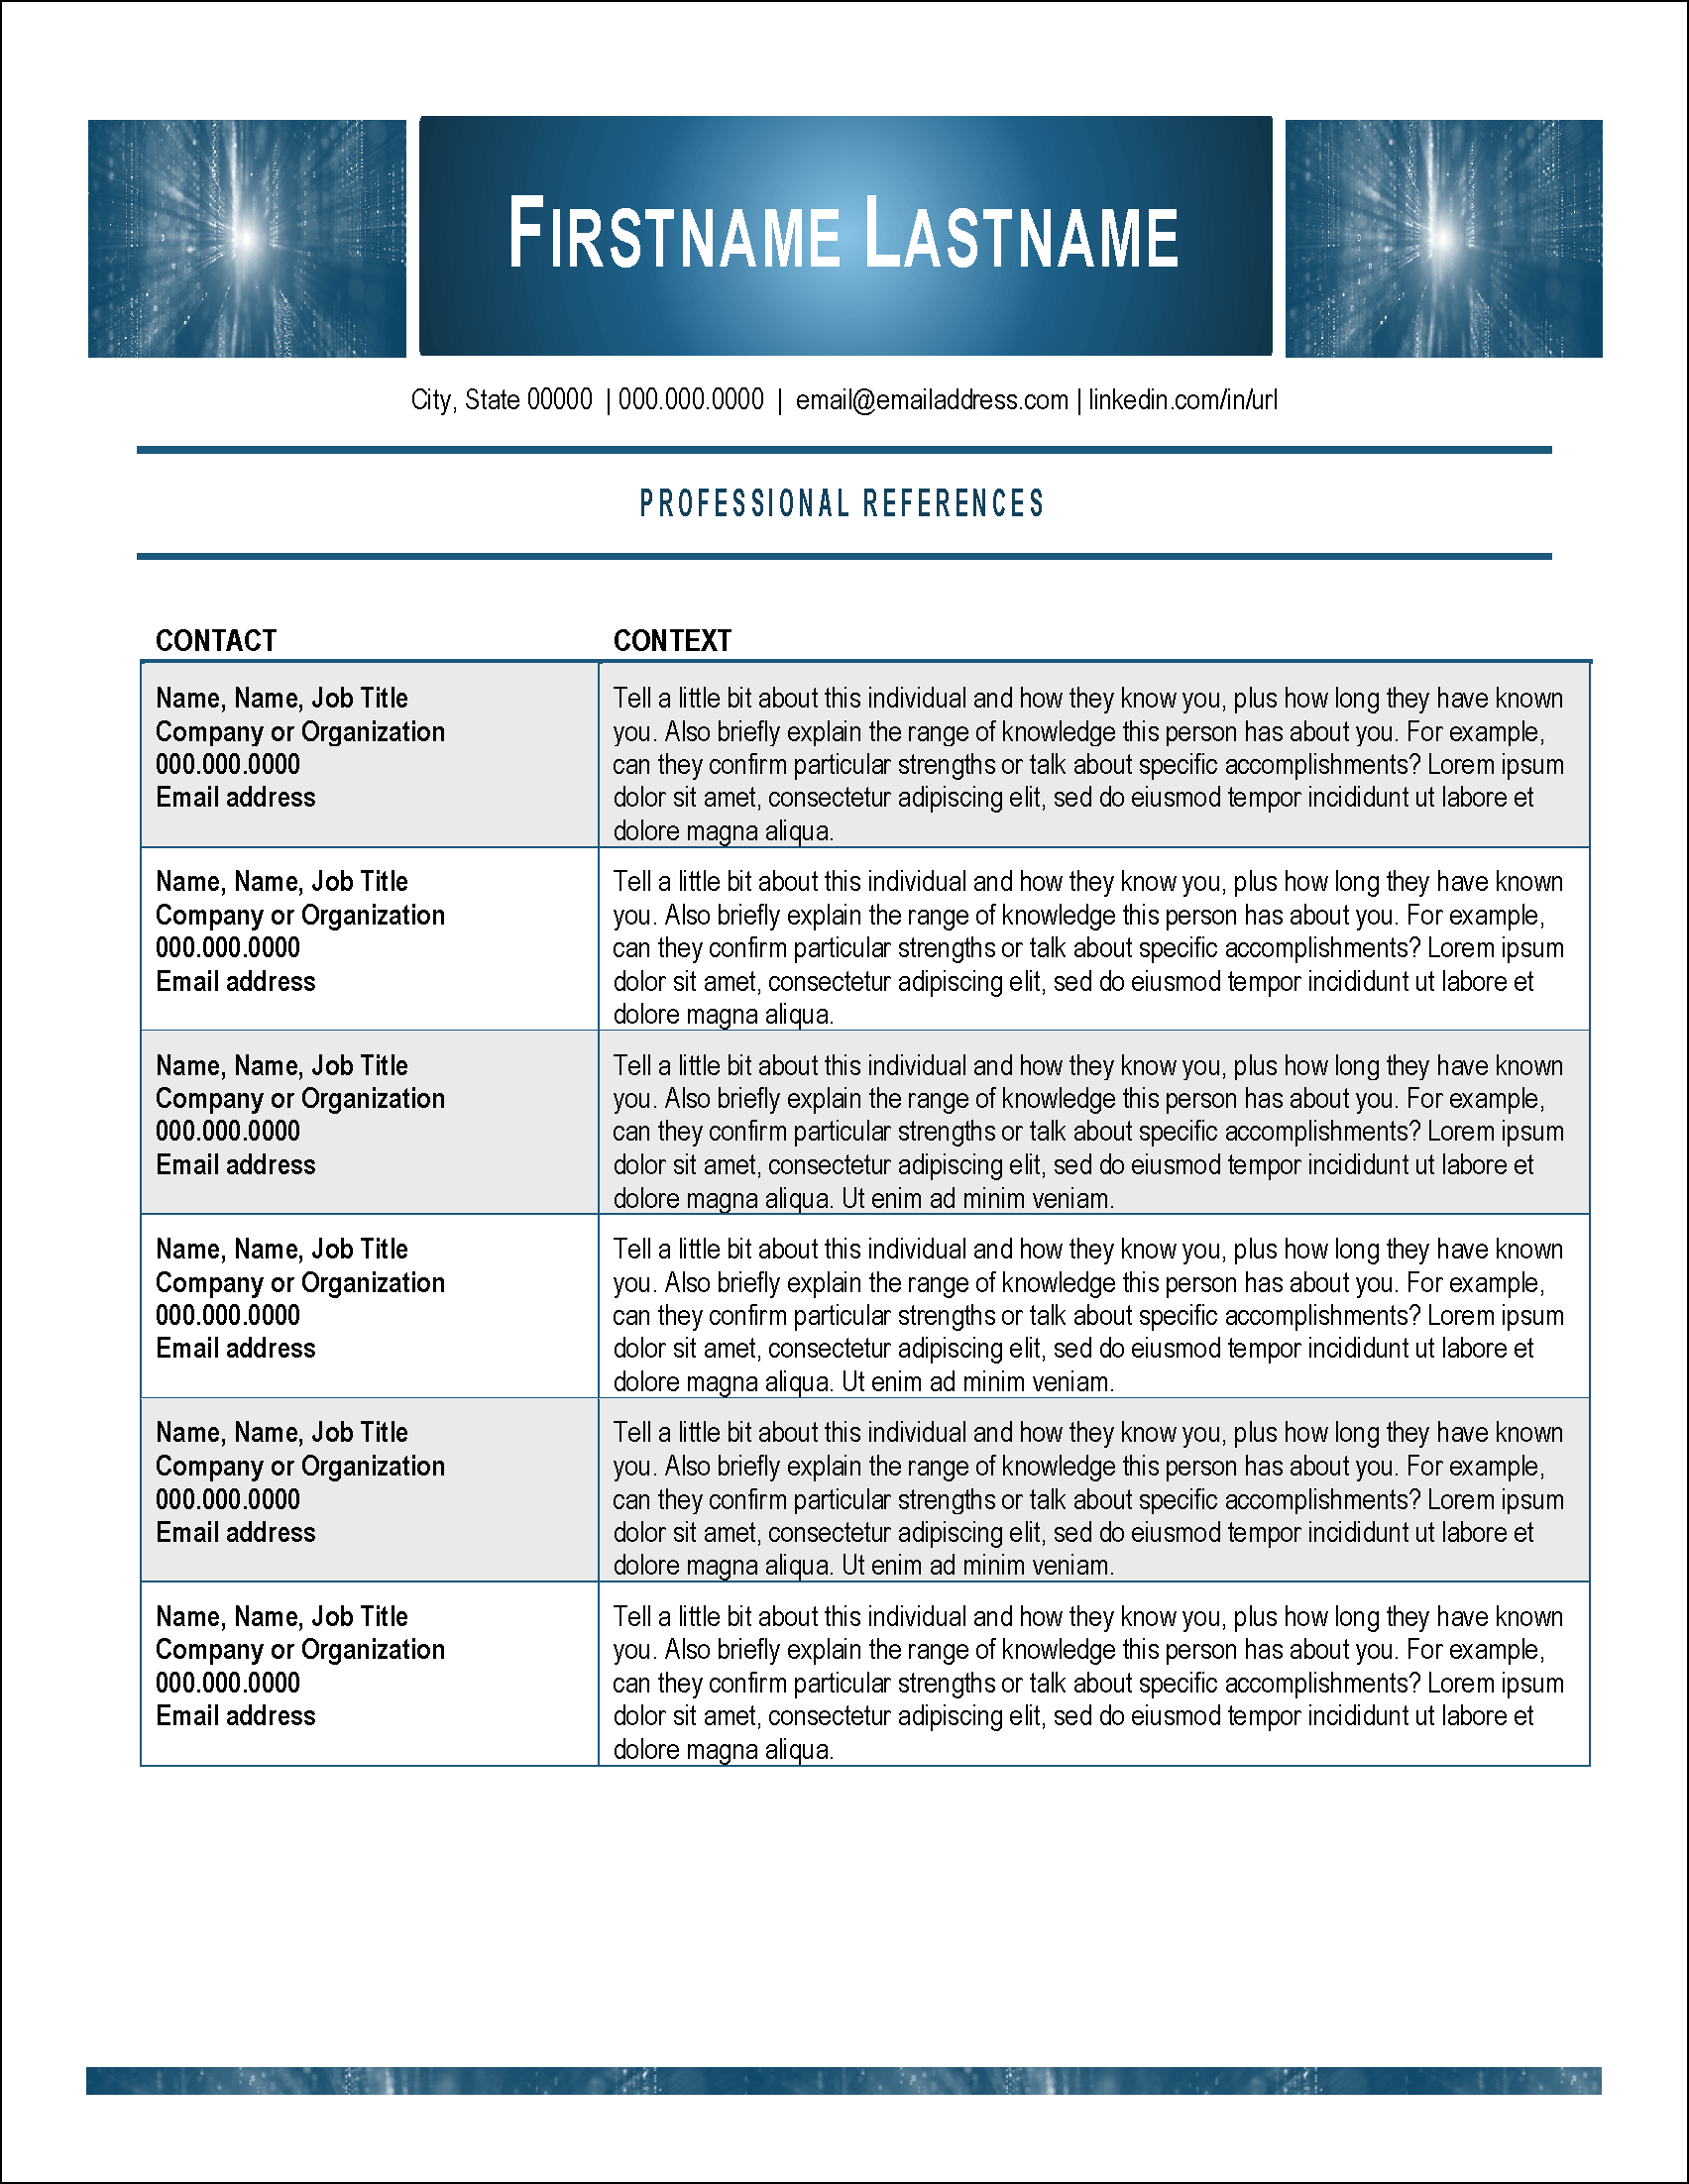 Data Scientist Professional References Template